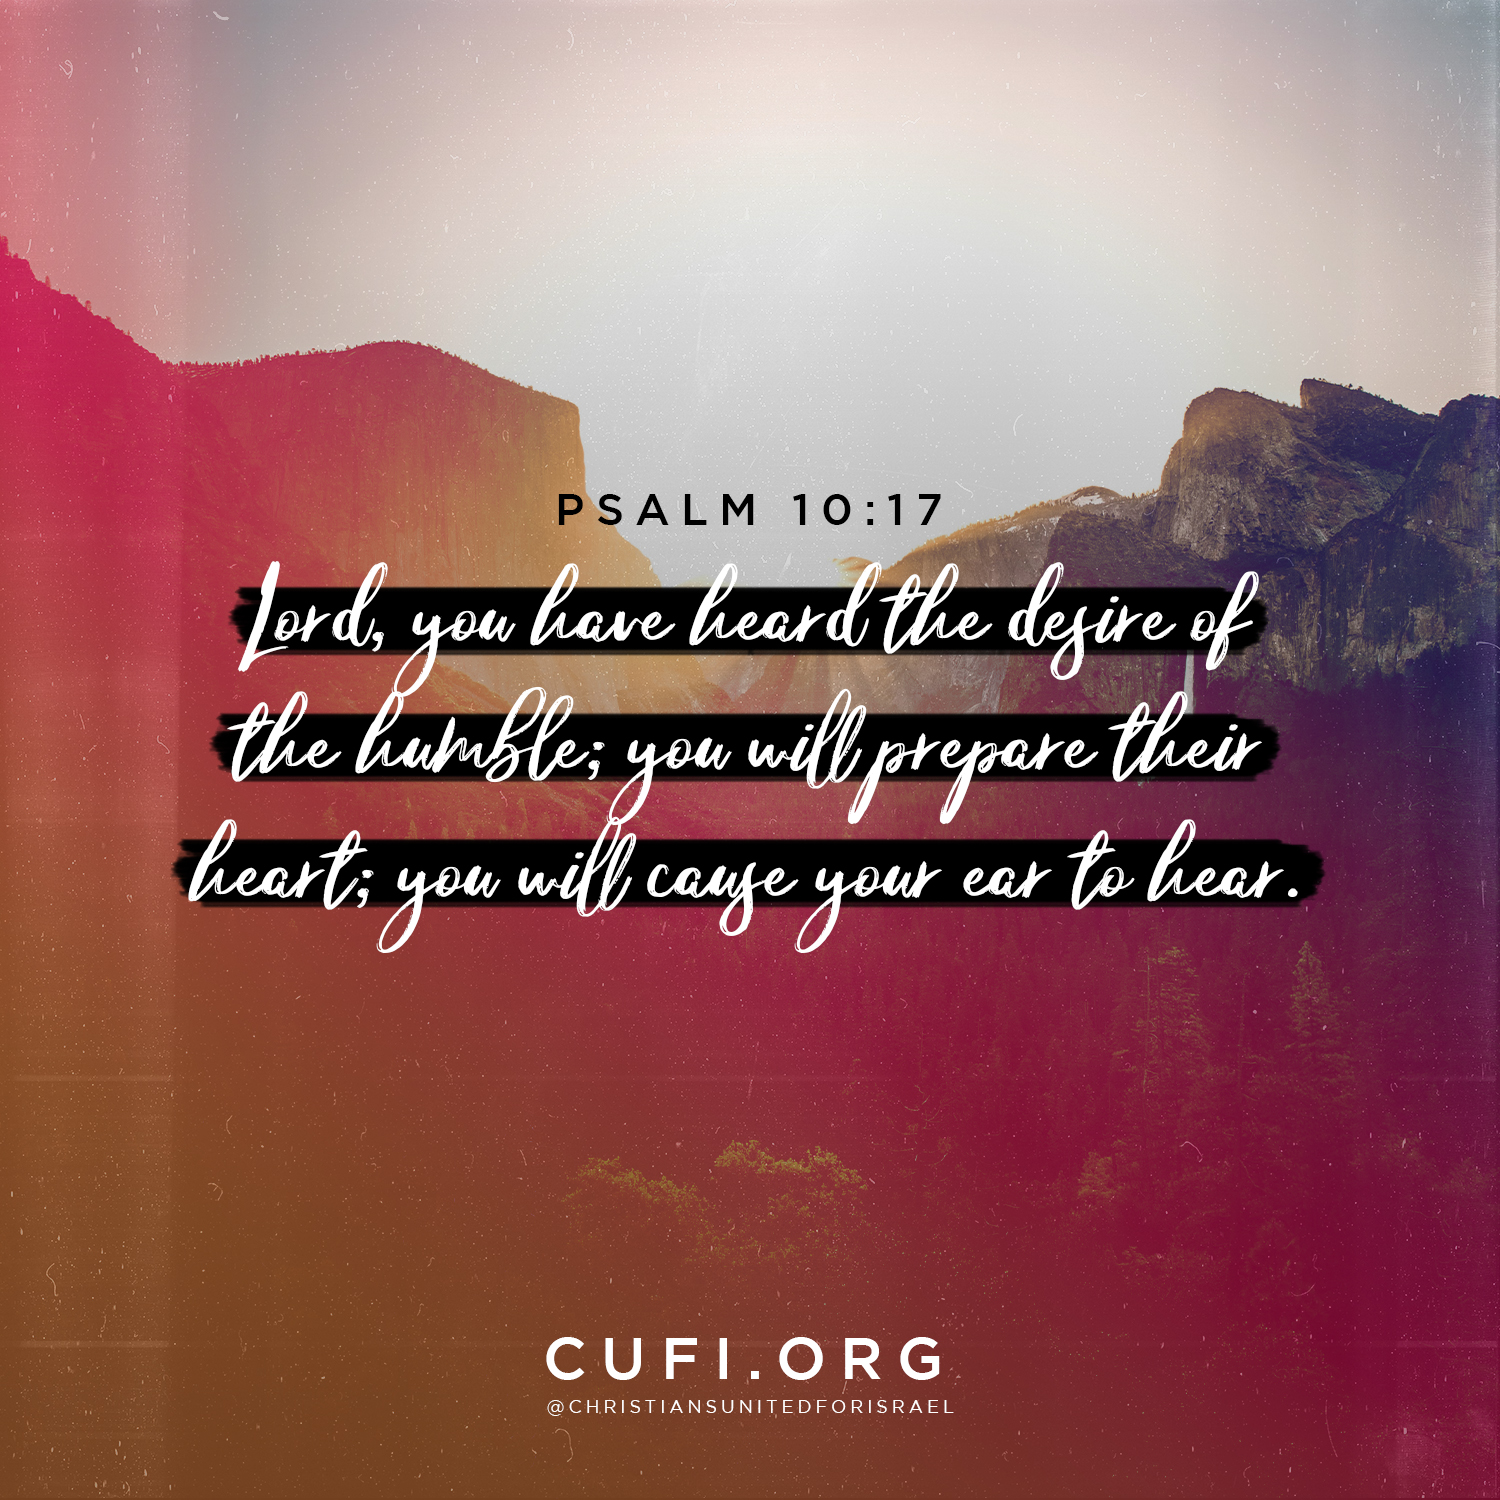 'PSALM 10:17 Lord, you have heard the desire the humble; you dbprepare their heart; you will caue your ear to hear. CUFI.ORG @CH.RIS NSUNITE DFOR SRAEL'